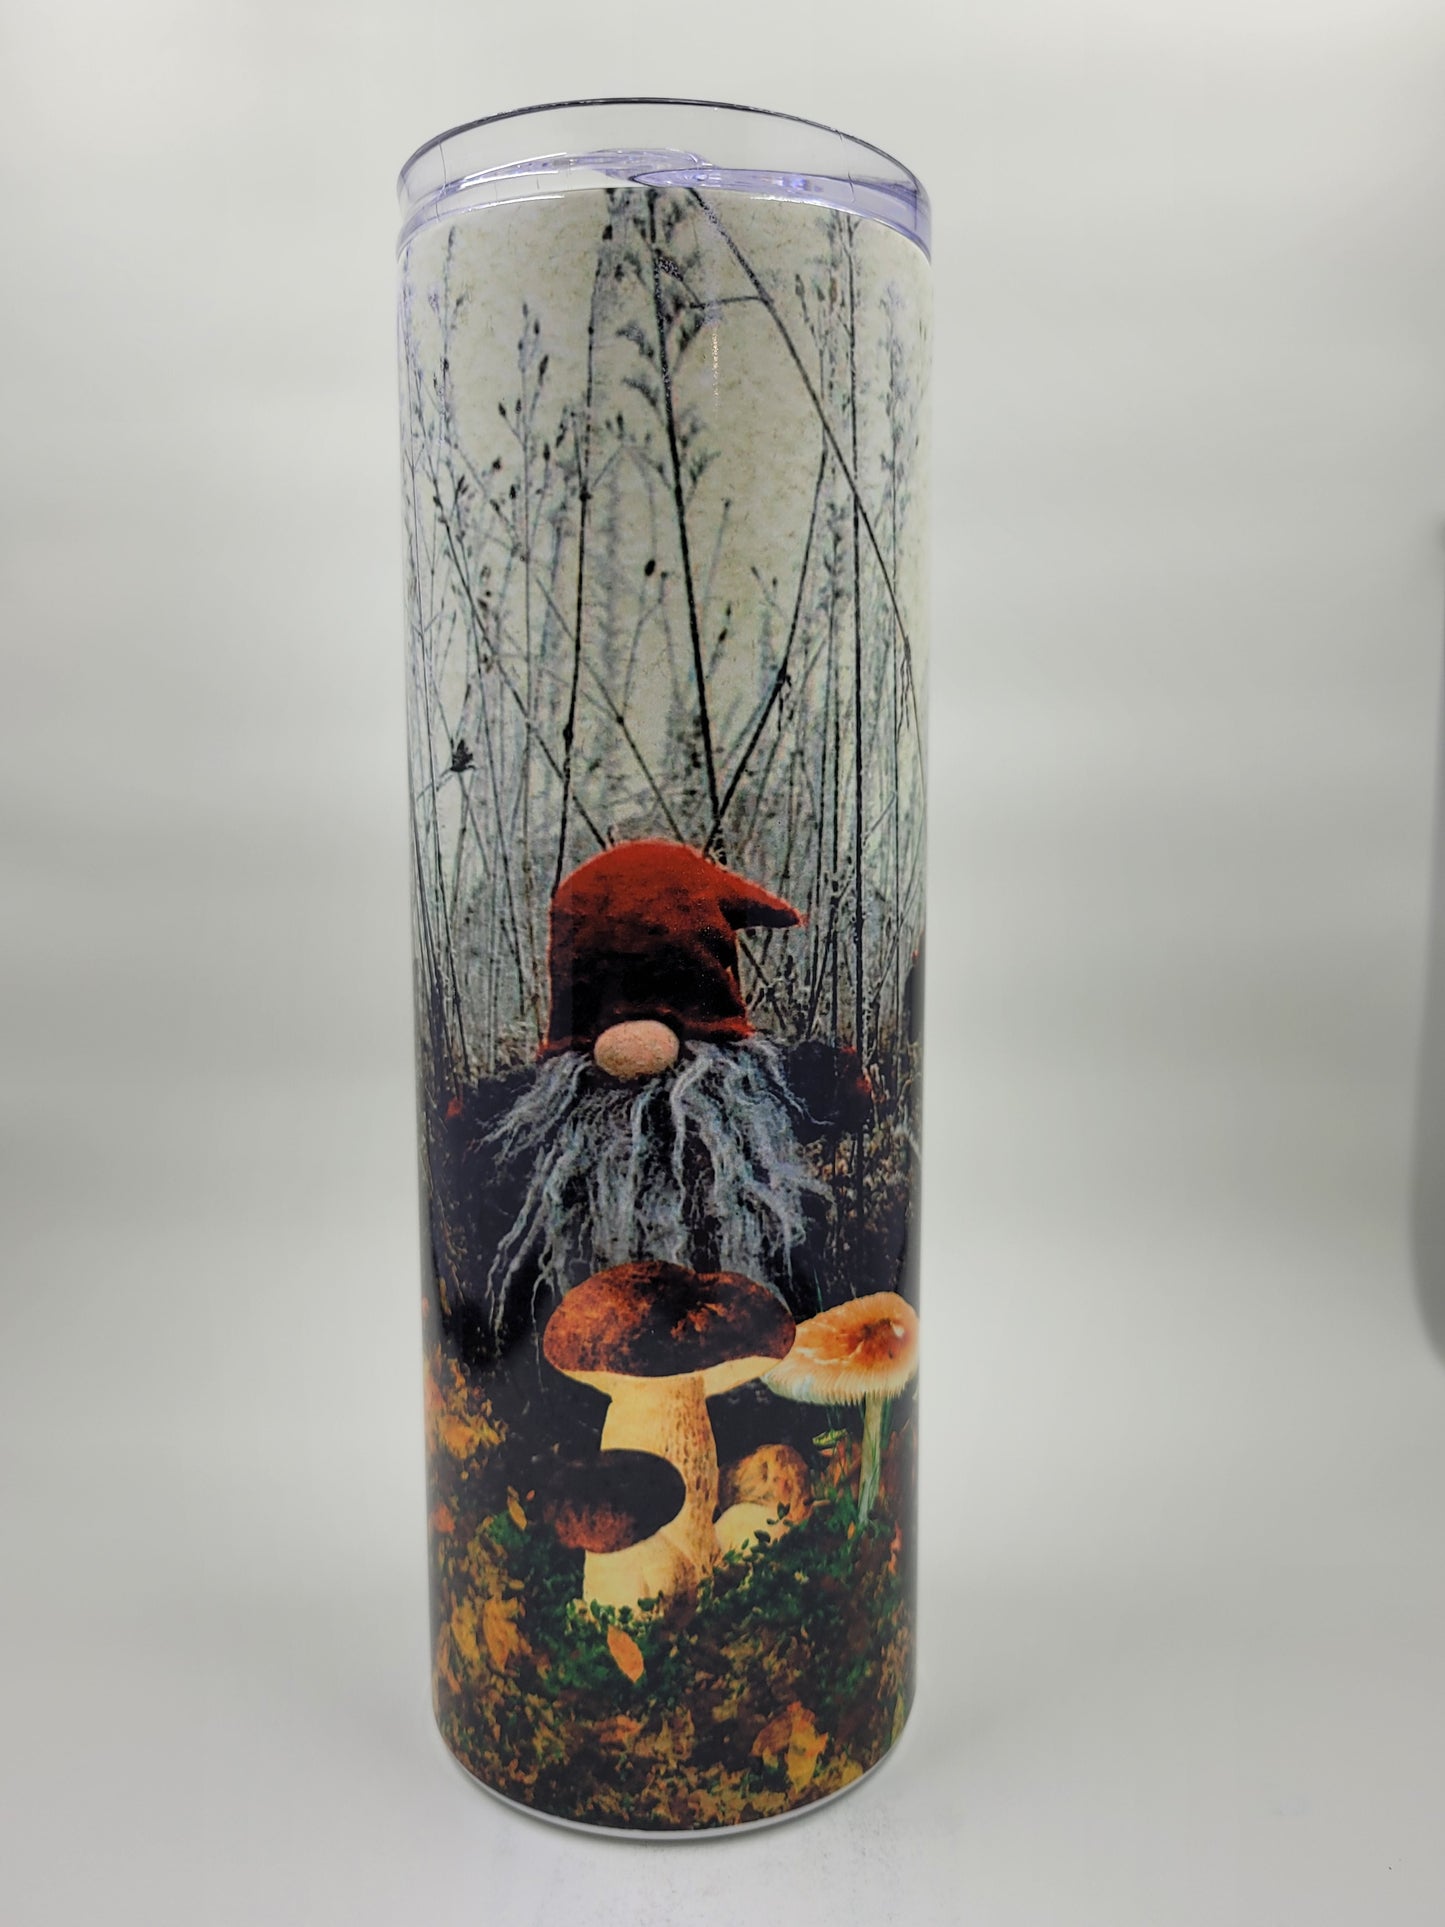 20 oz Stainless Steel tumbler with a gnome winter land image